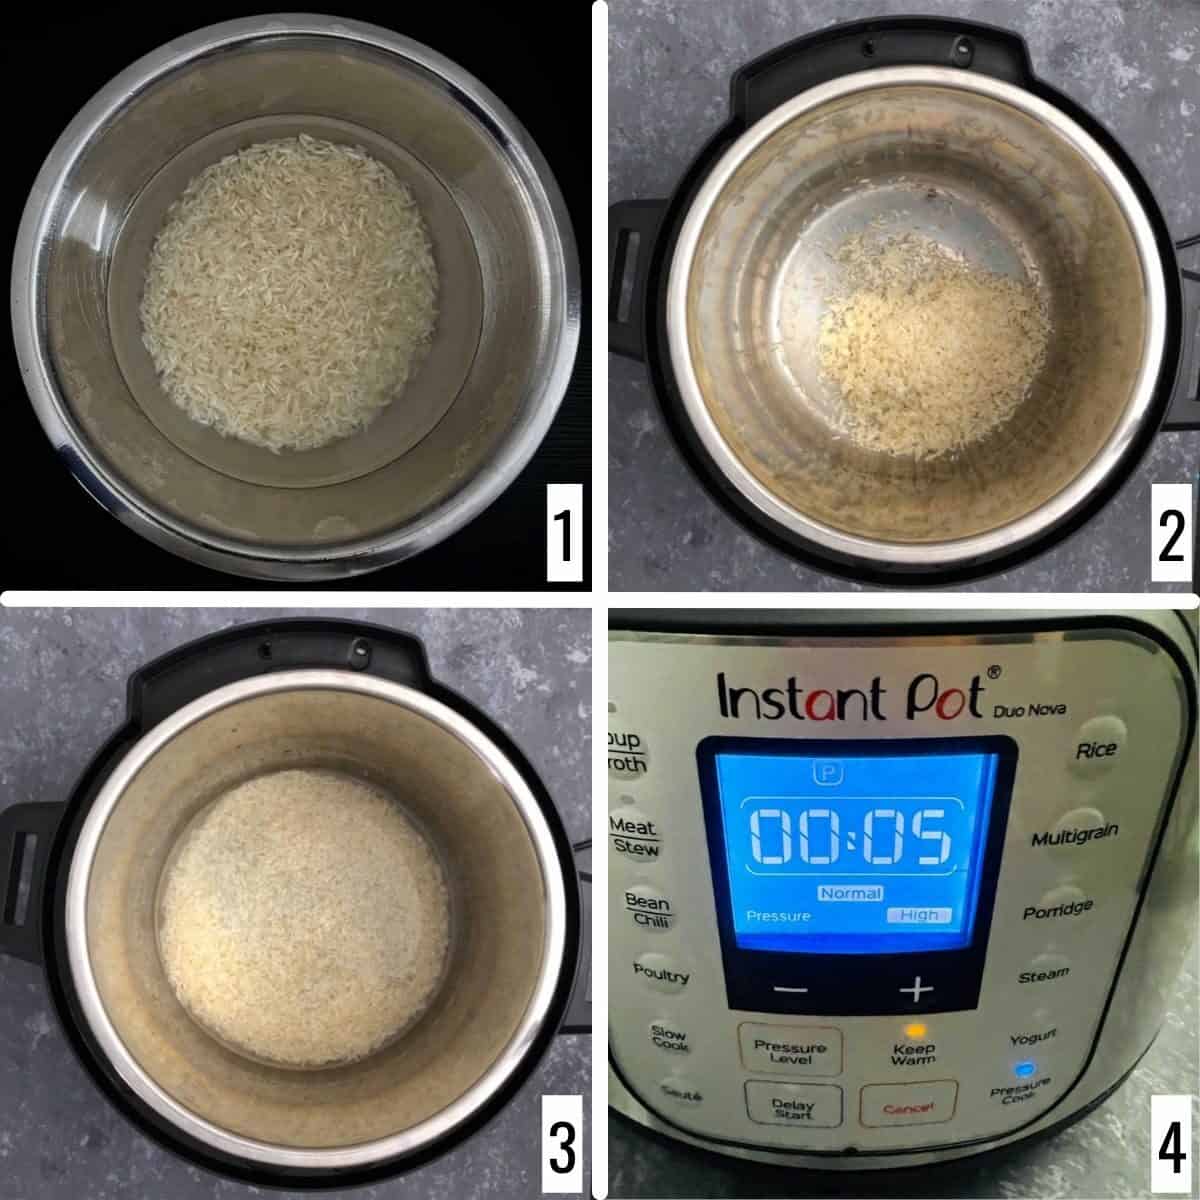 wash rice and pressure cook.